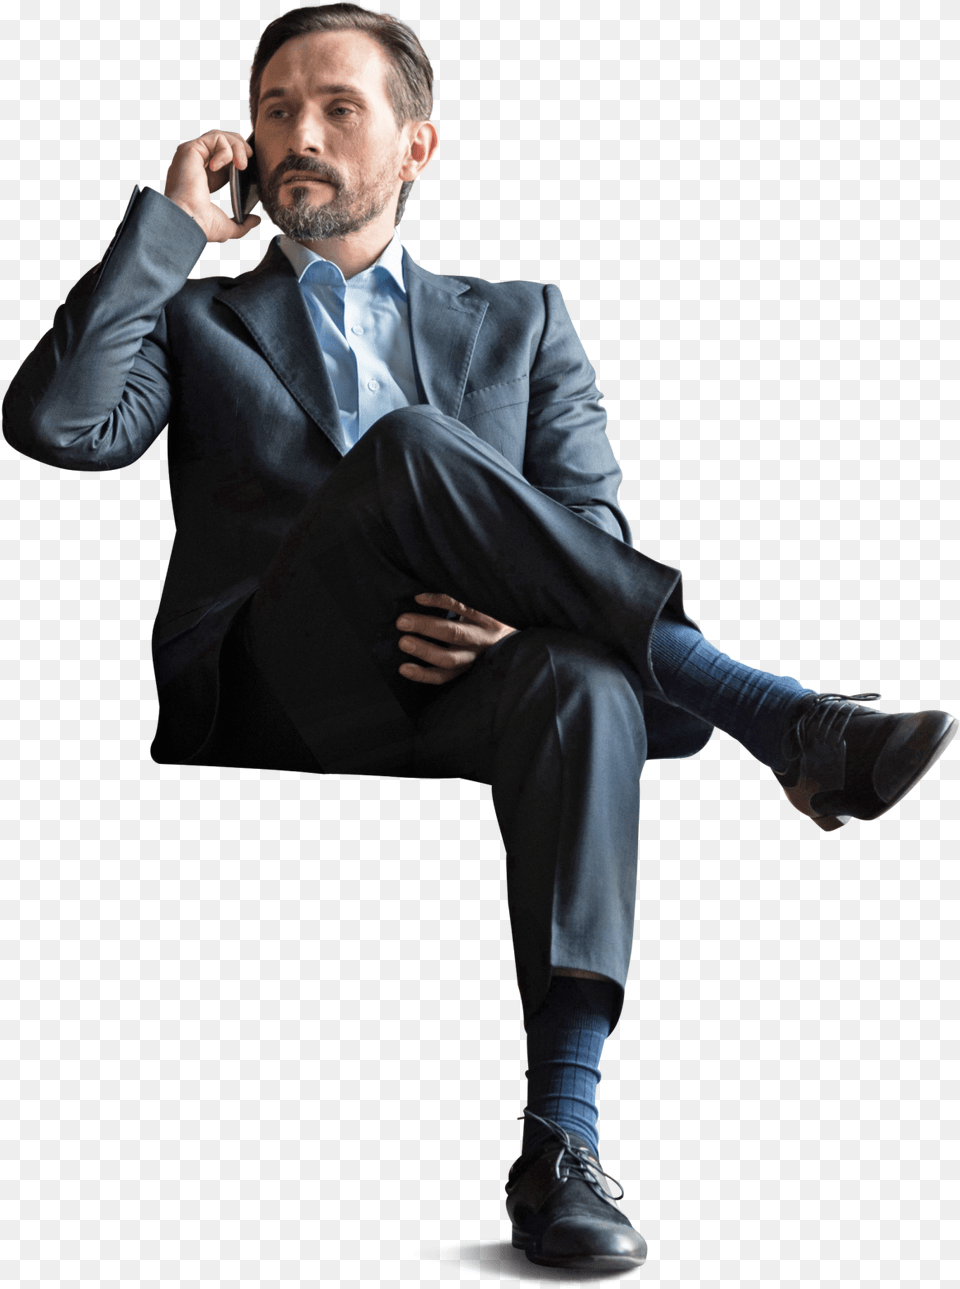 Office Businessman Sitting With Phone Cut Out Architecture People Sitting, Accessories, Suit, Shoe, Jacket Png Image